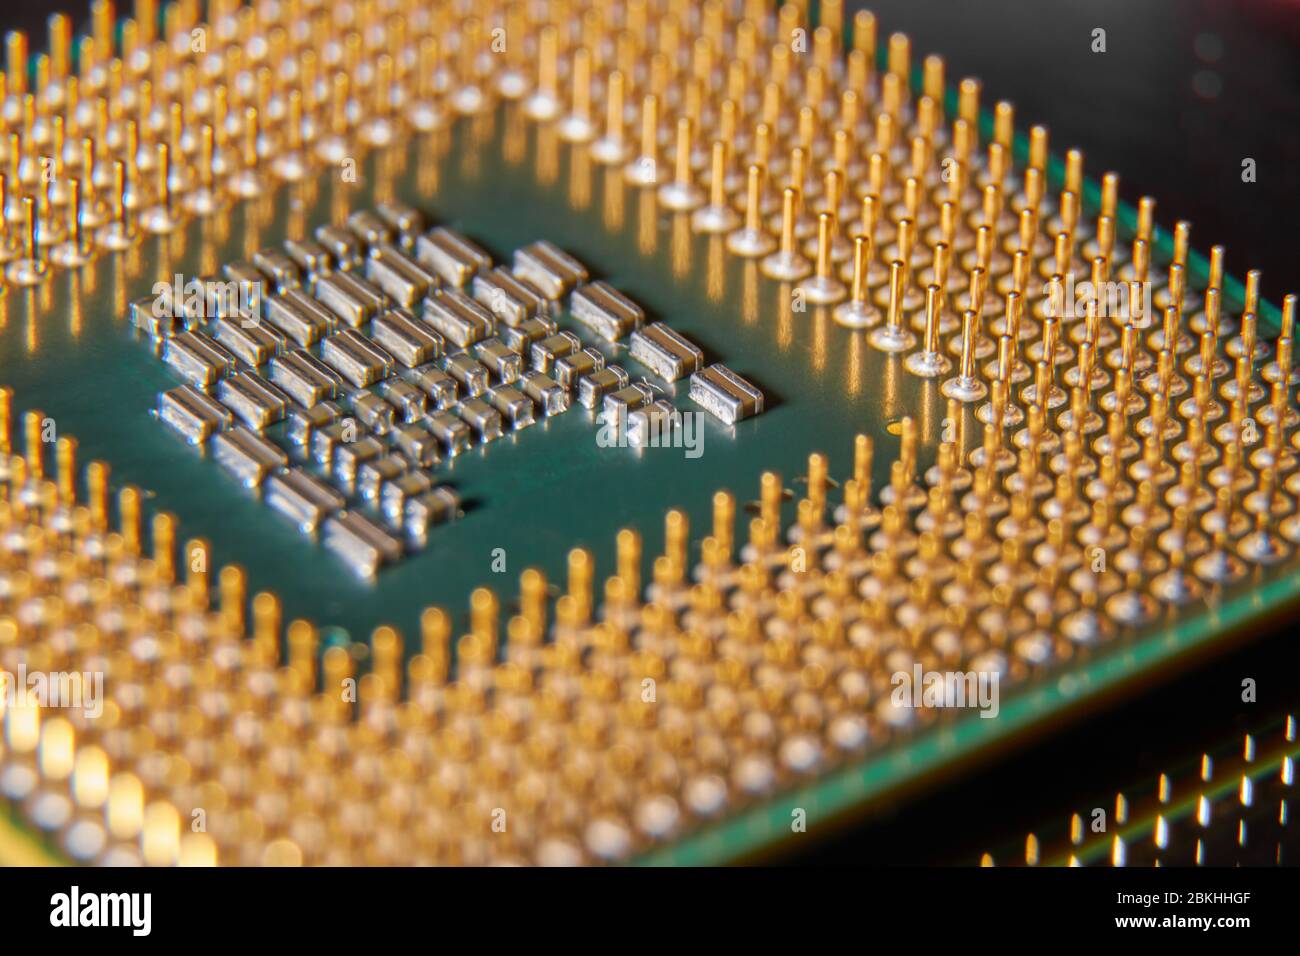 Processor in close up details Stock Photo